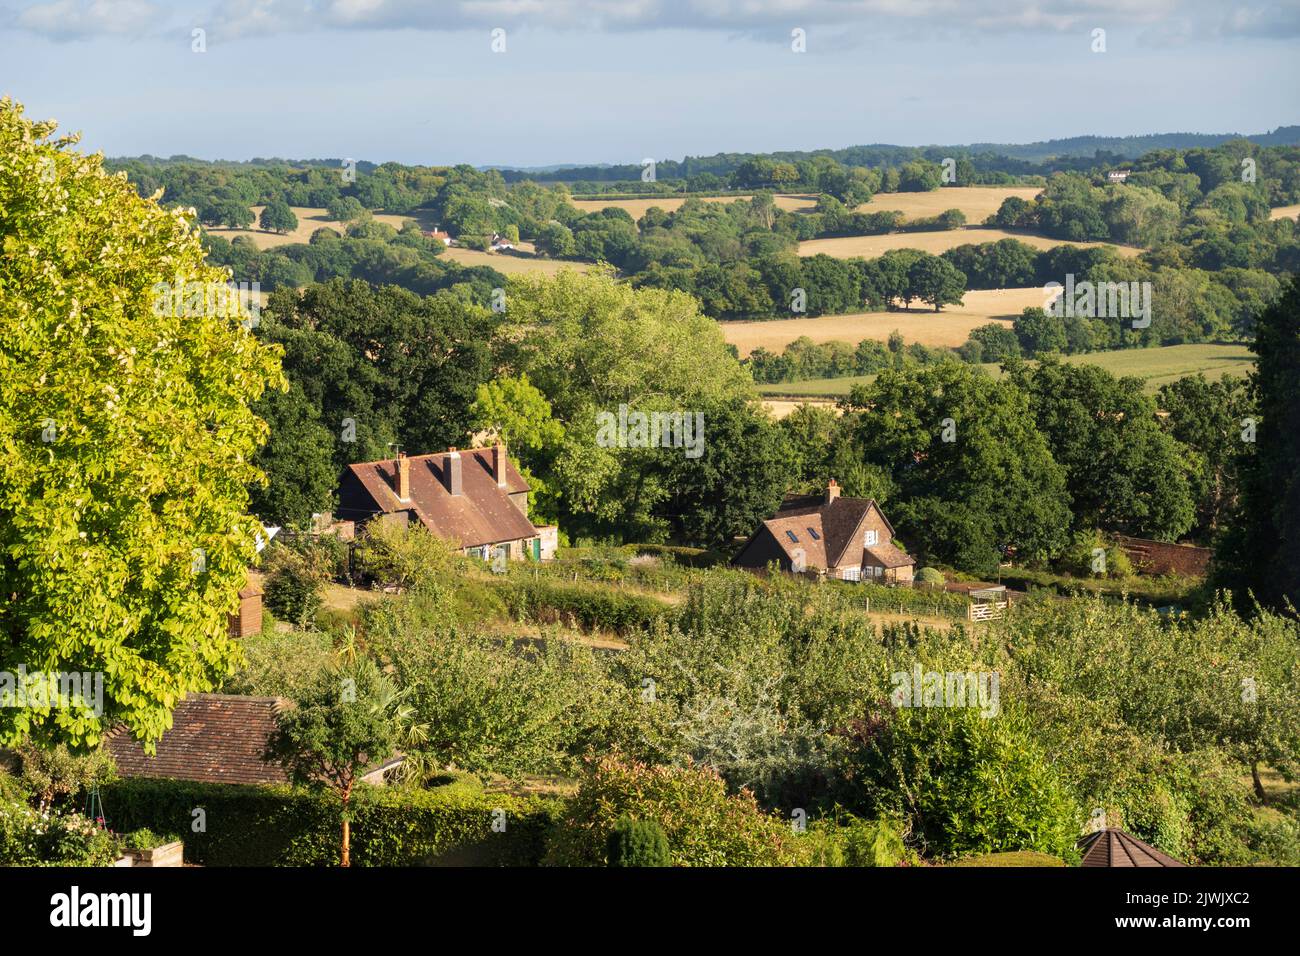 View over High Weald countryside from Burwash village, Burwash, East Sussex, England, United Kingdom, Europe Stock Photo